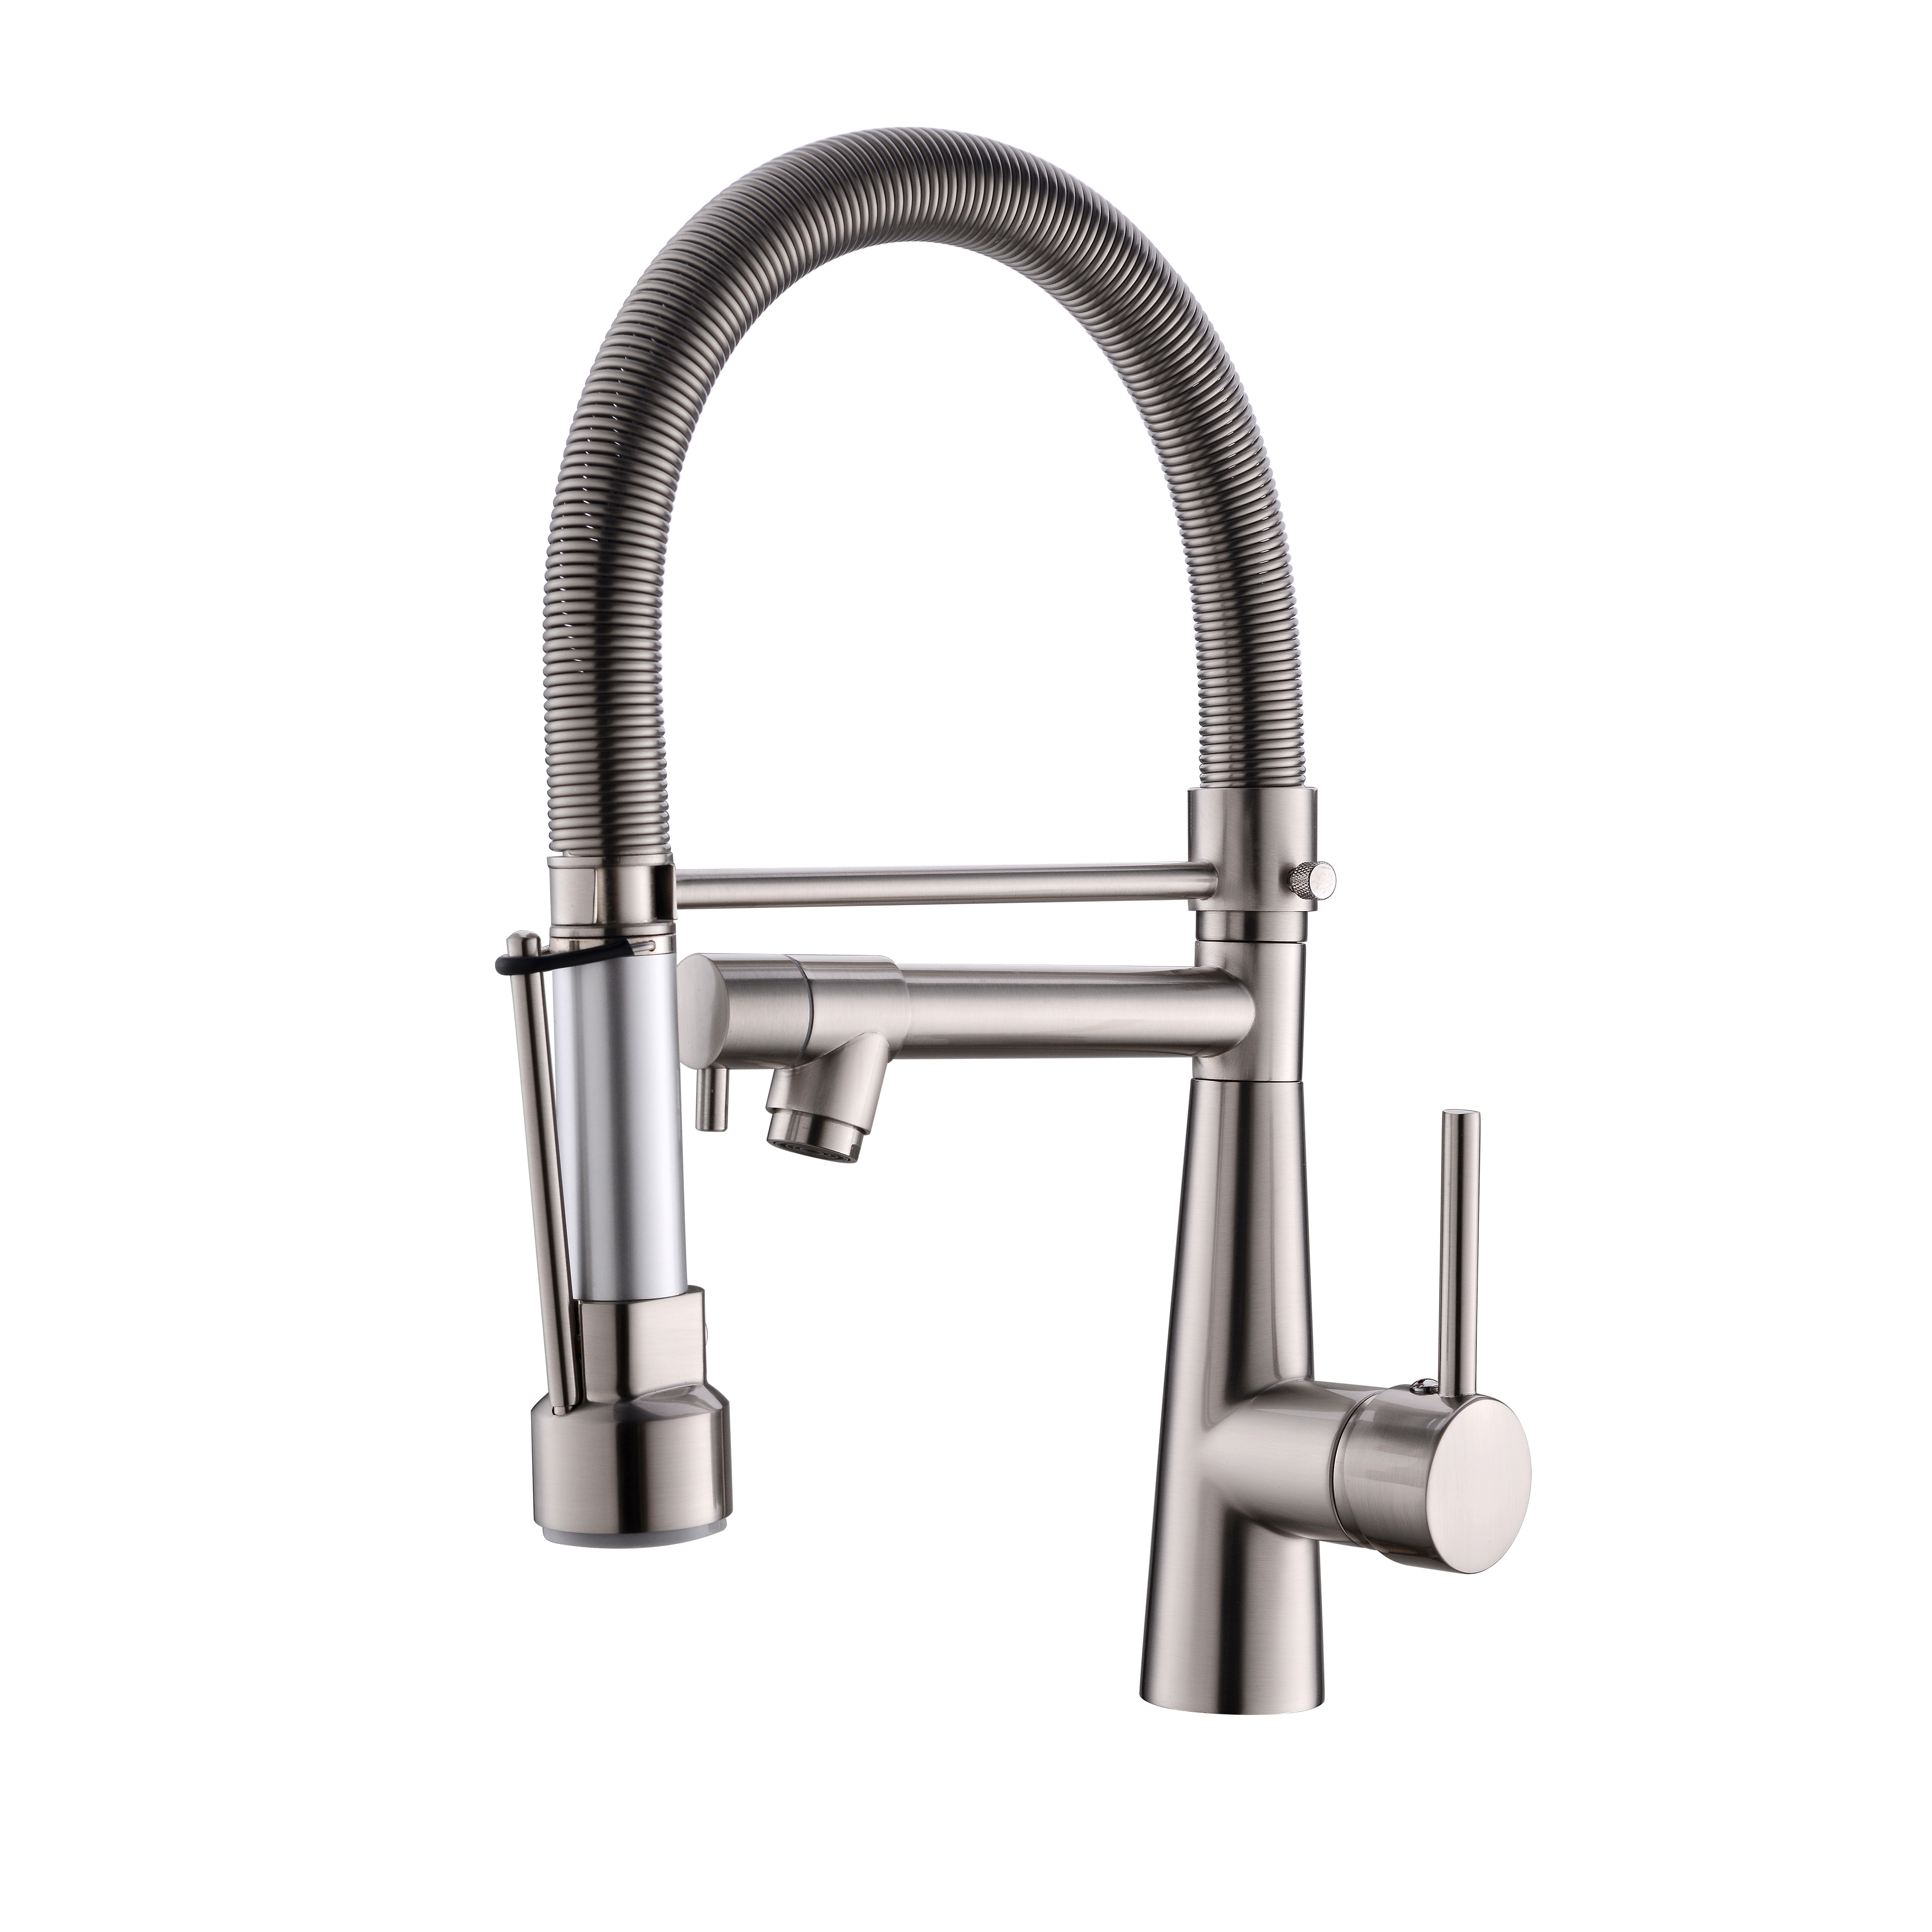 Pull Down Kitchen Faucet With Lock Sprayer,Single Handle Spring Stainless Steel Kitchen Sink Faucet Brushed Nickel